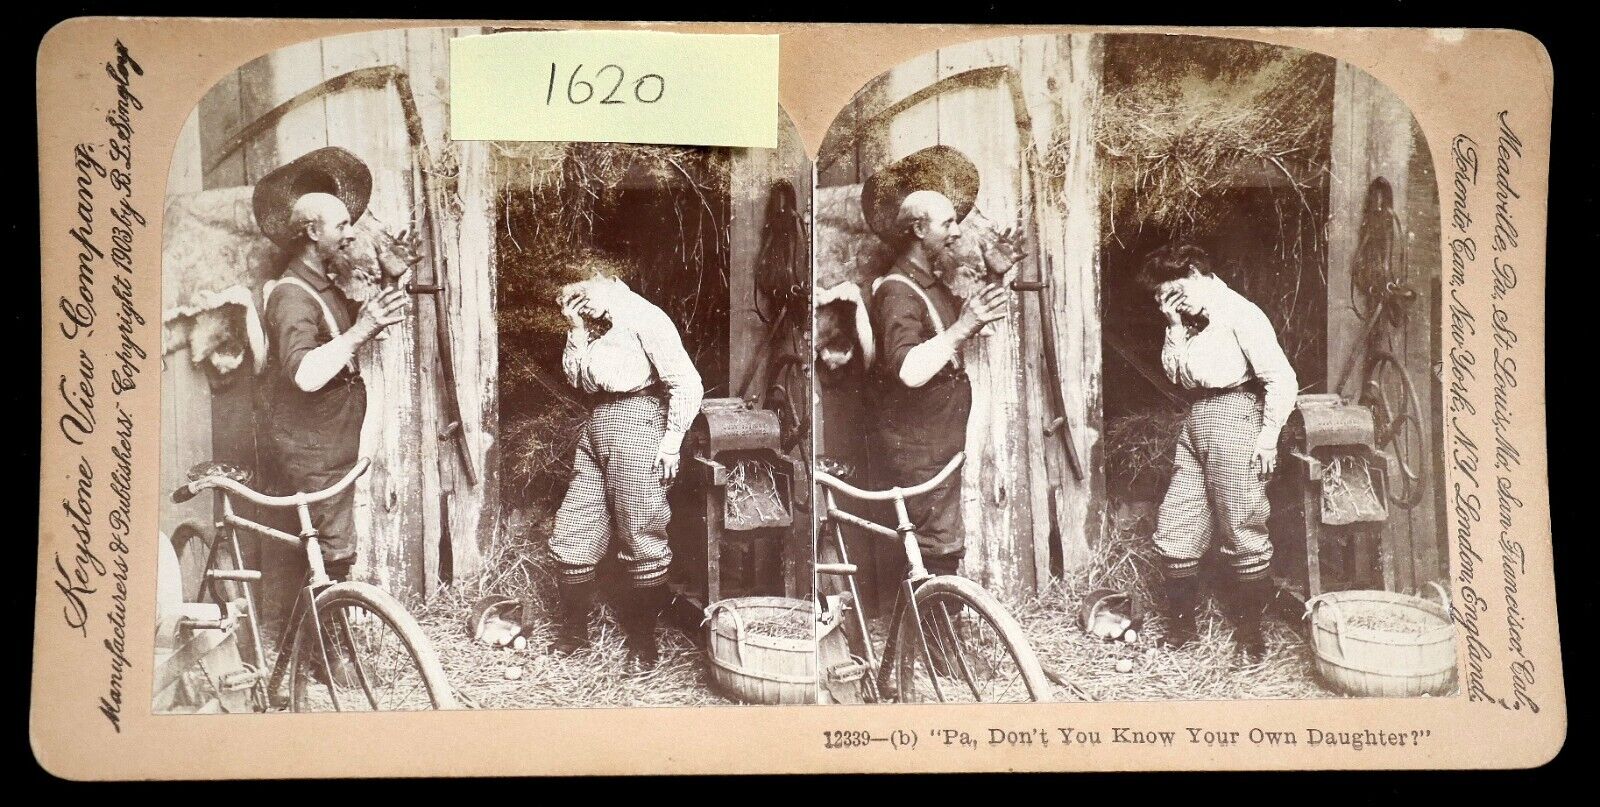 Pa Don't you Know your Own Daughter Comic- Keystone Stereoview #12339